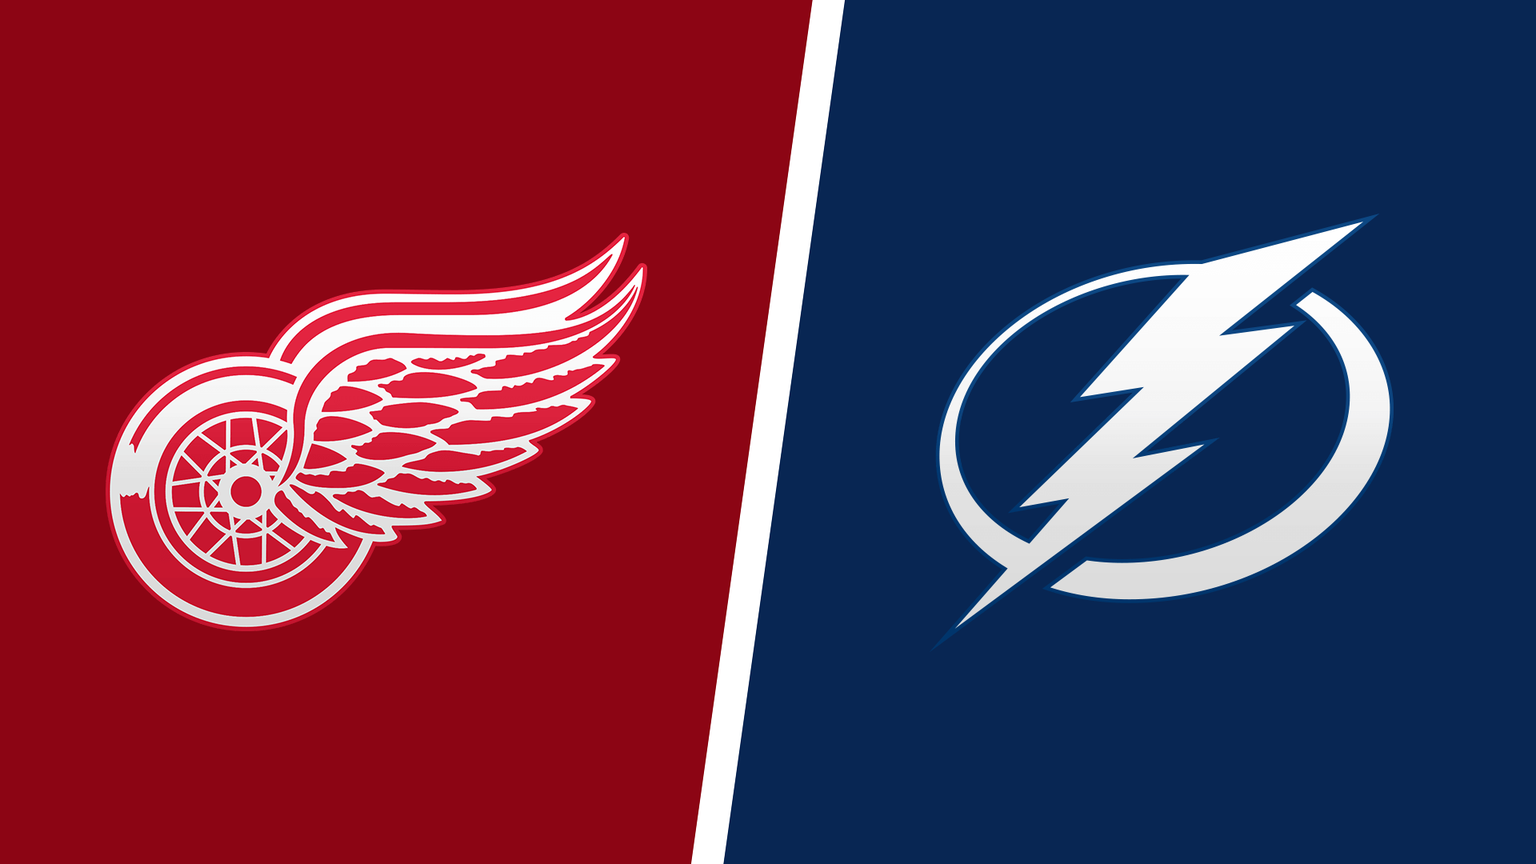 How to Watch Tampa Bay Lightning vs. Detroit Red Wings Game Live Online